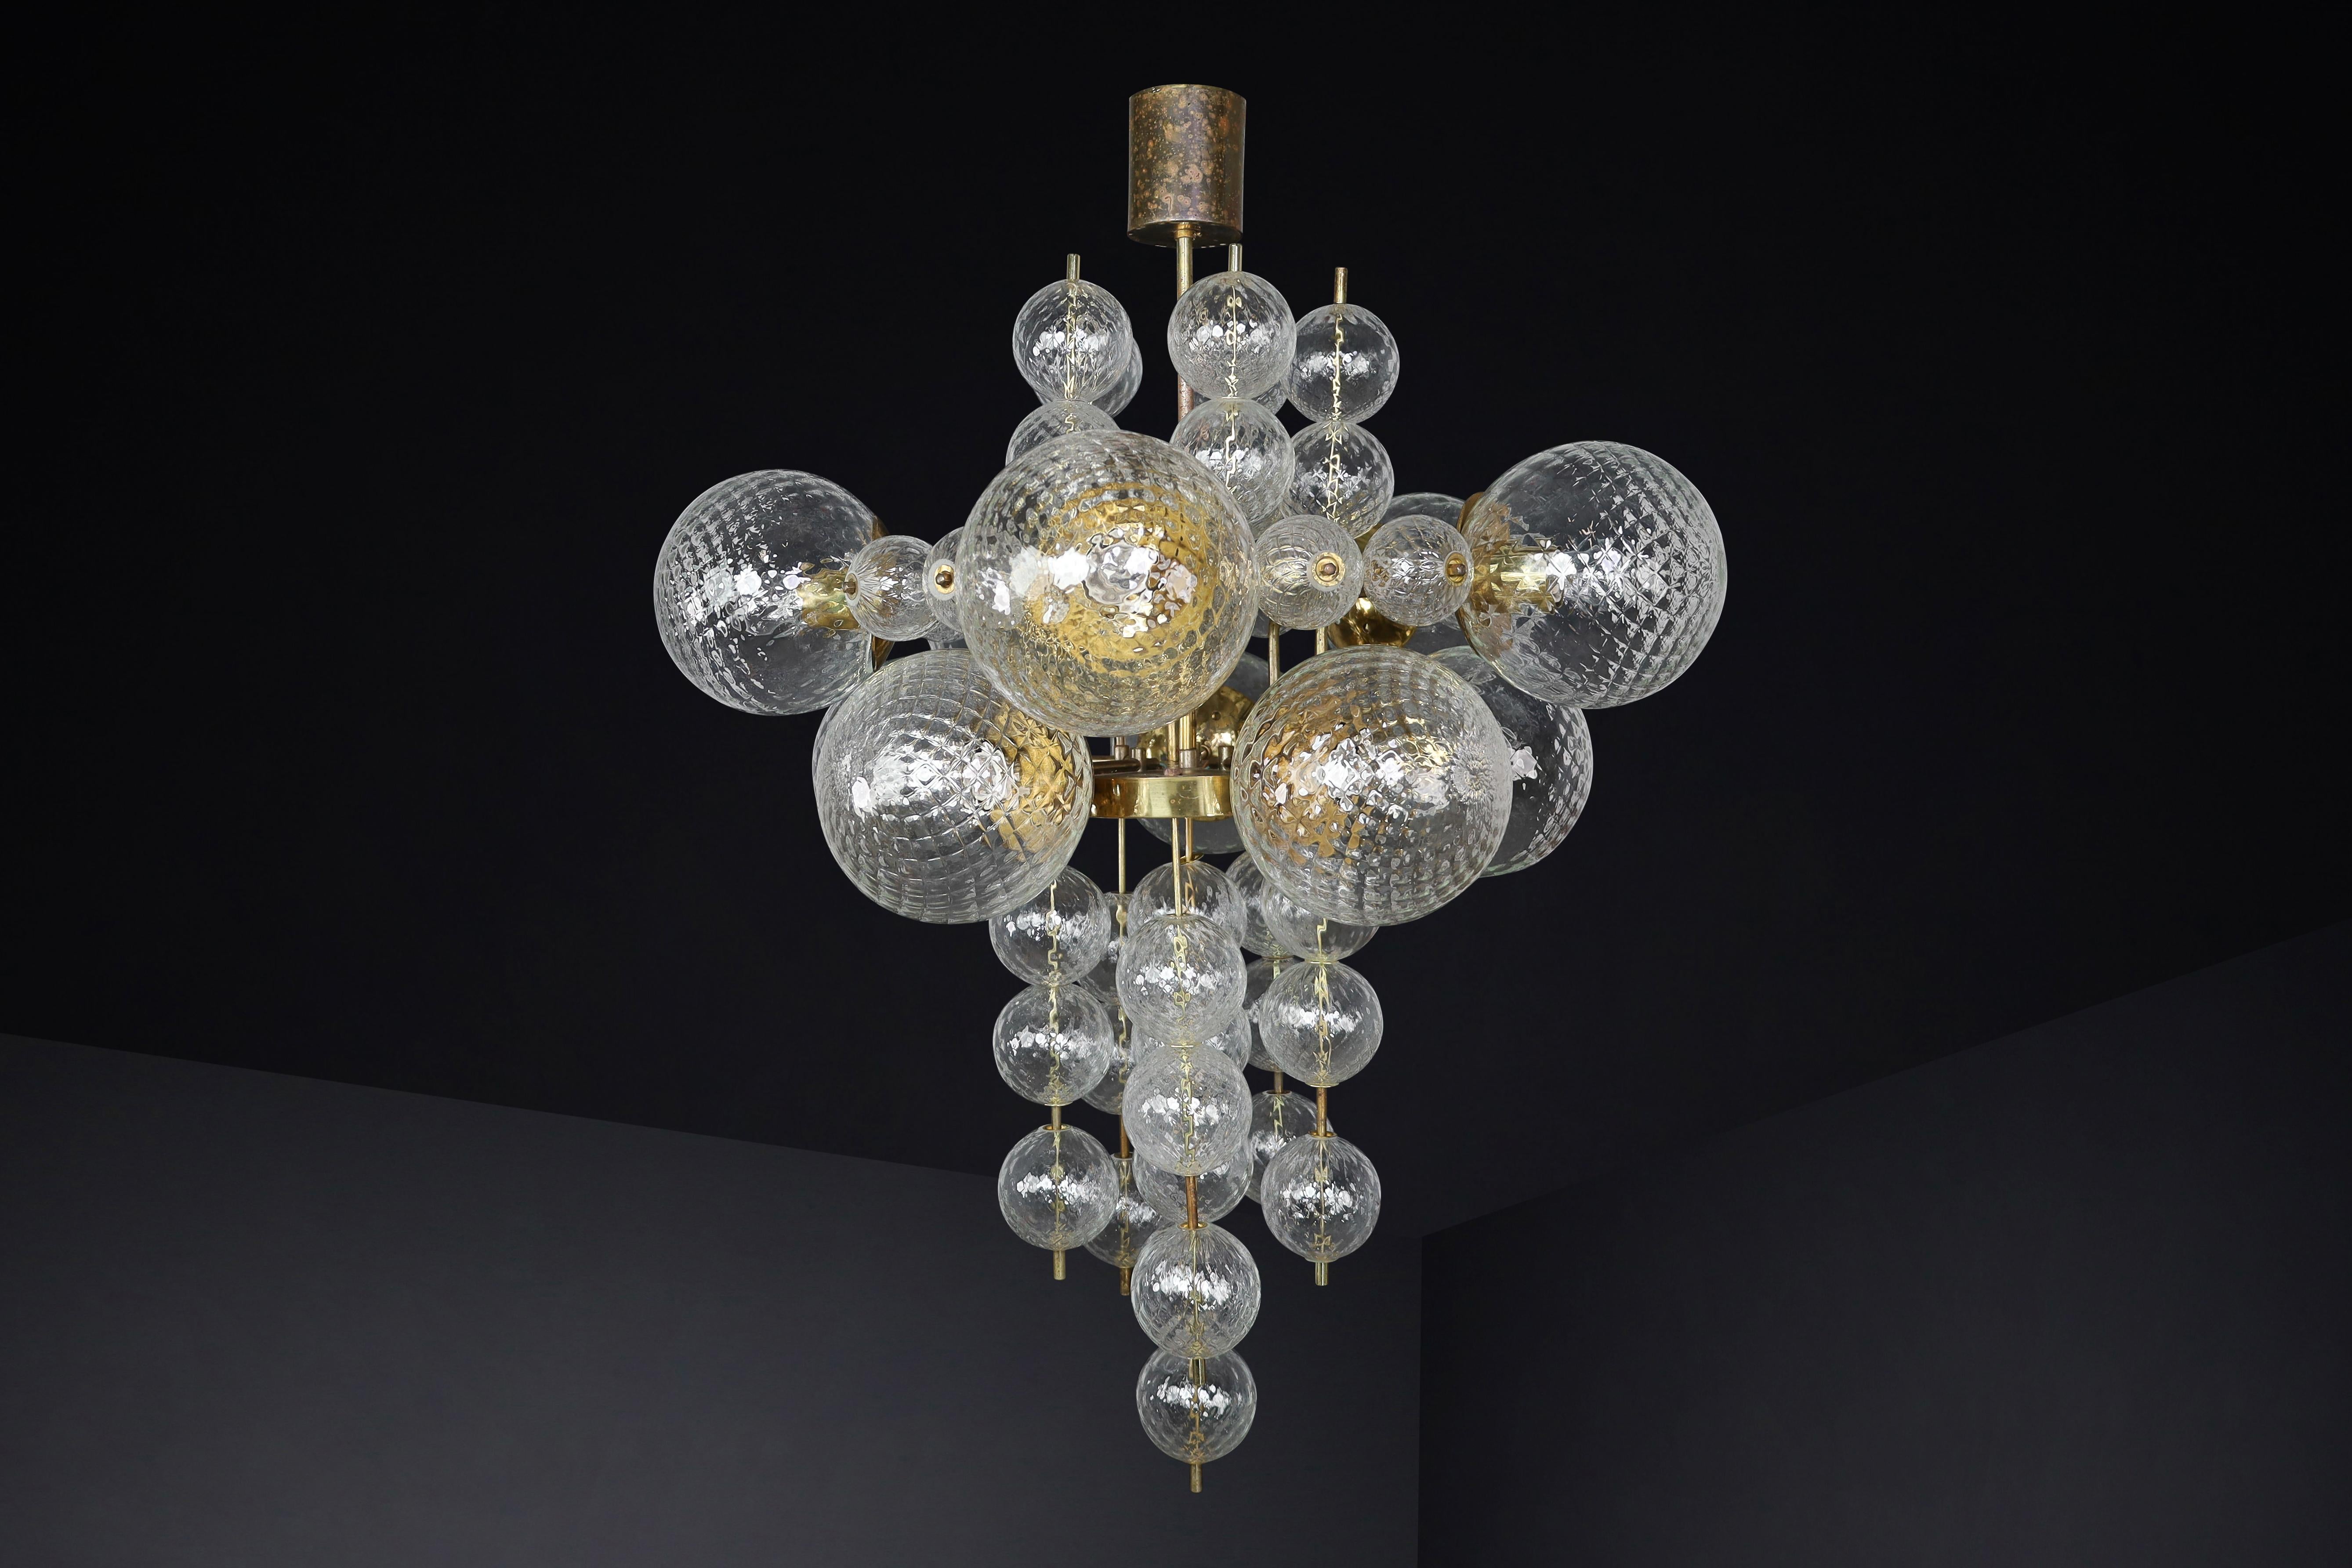  Chandelier with Patinated brass fixture and hand-blowed glass globes  CZ 1960s For Sale 3